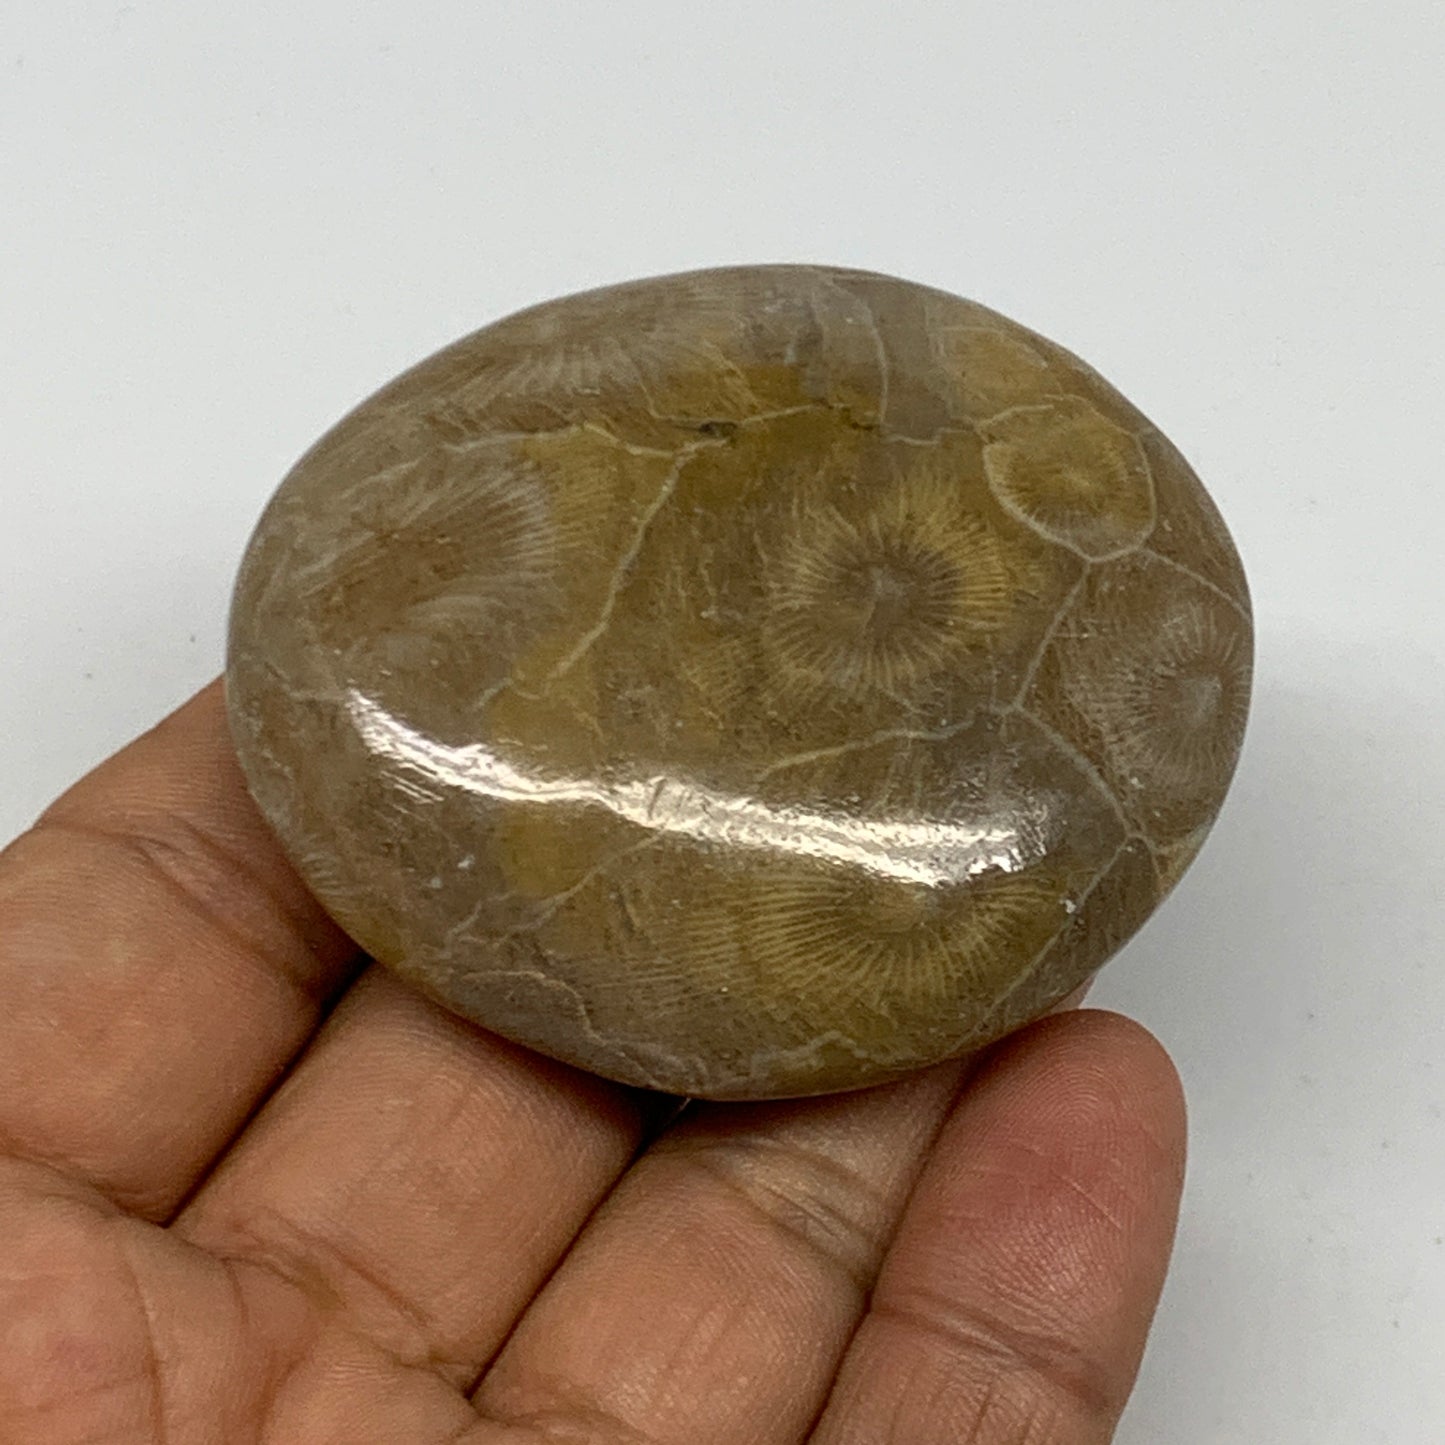 71.3g,2.2"x1.9"x 0.7", Coral Fossils Palm-Stone Polished from Morocco, B20398